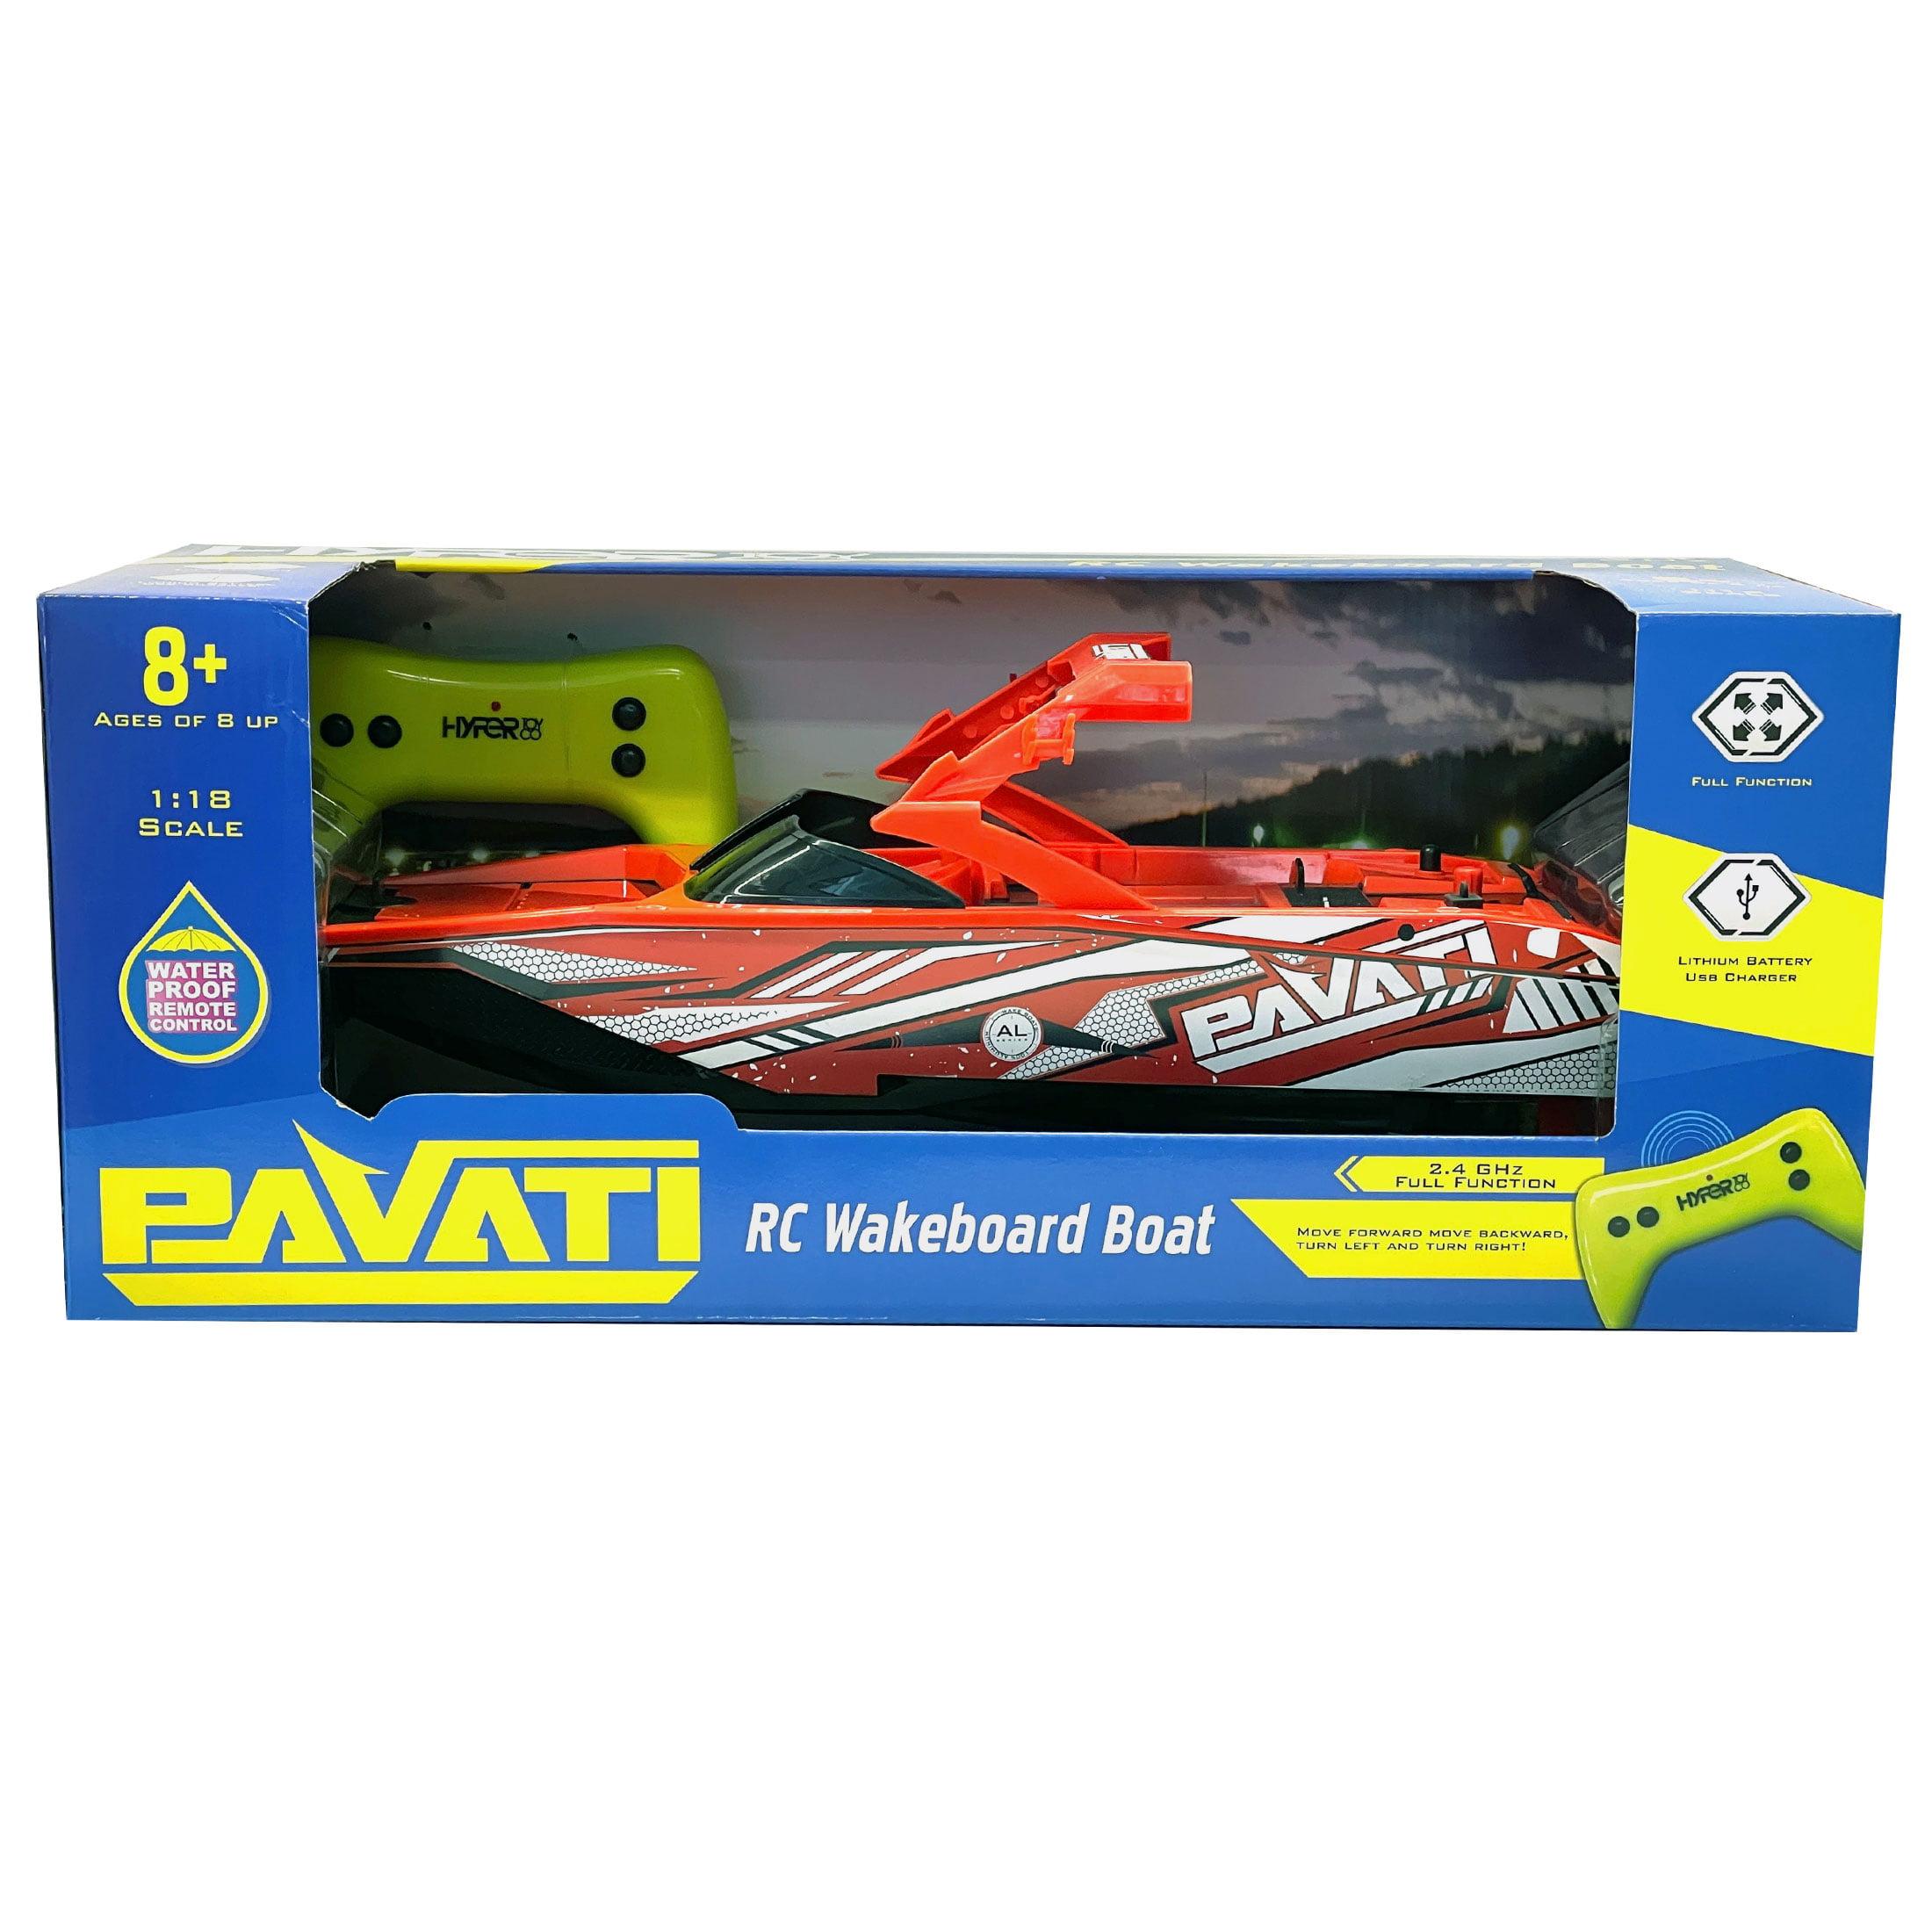 Pavati Wakeboard Boat Toy: Unlock Your Wakeboarding Potential with Pavati: Customization and Performance for All Levels